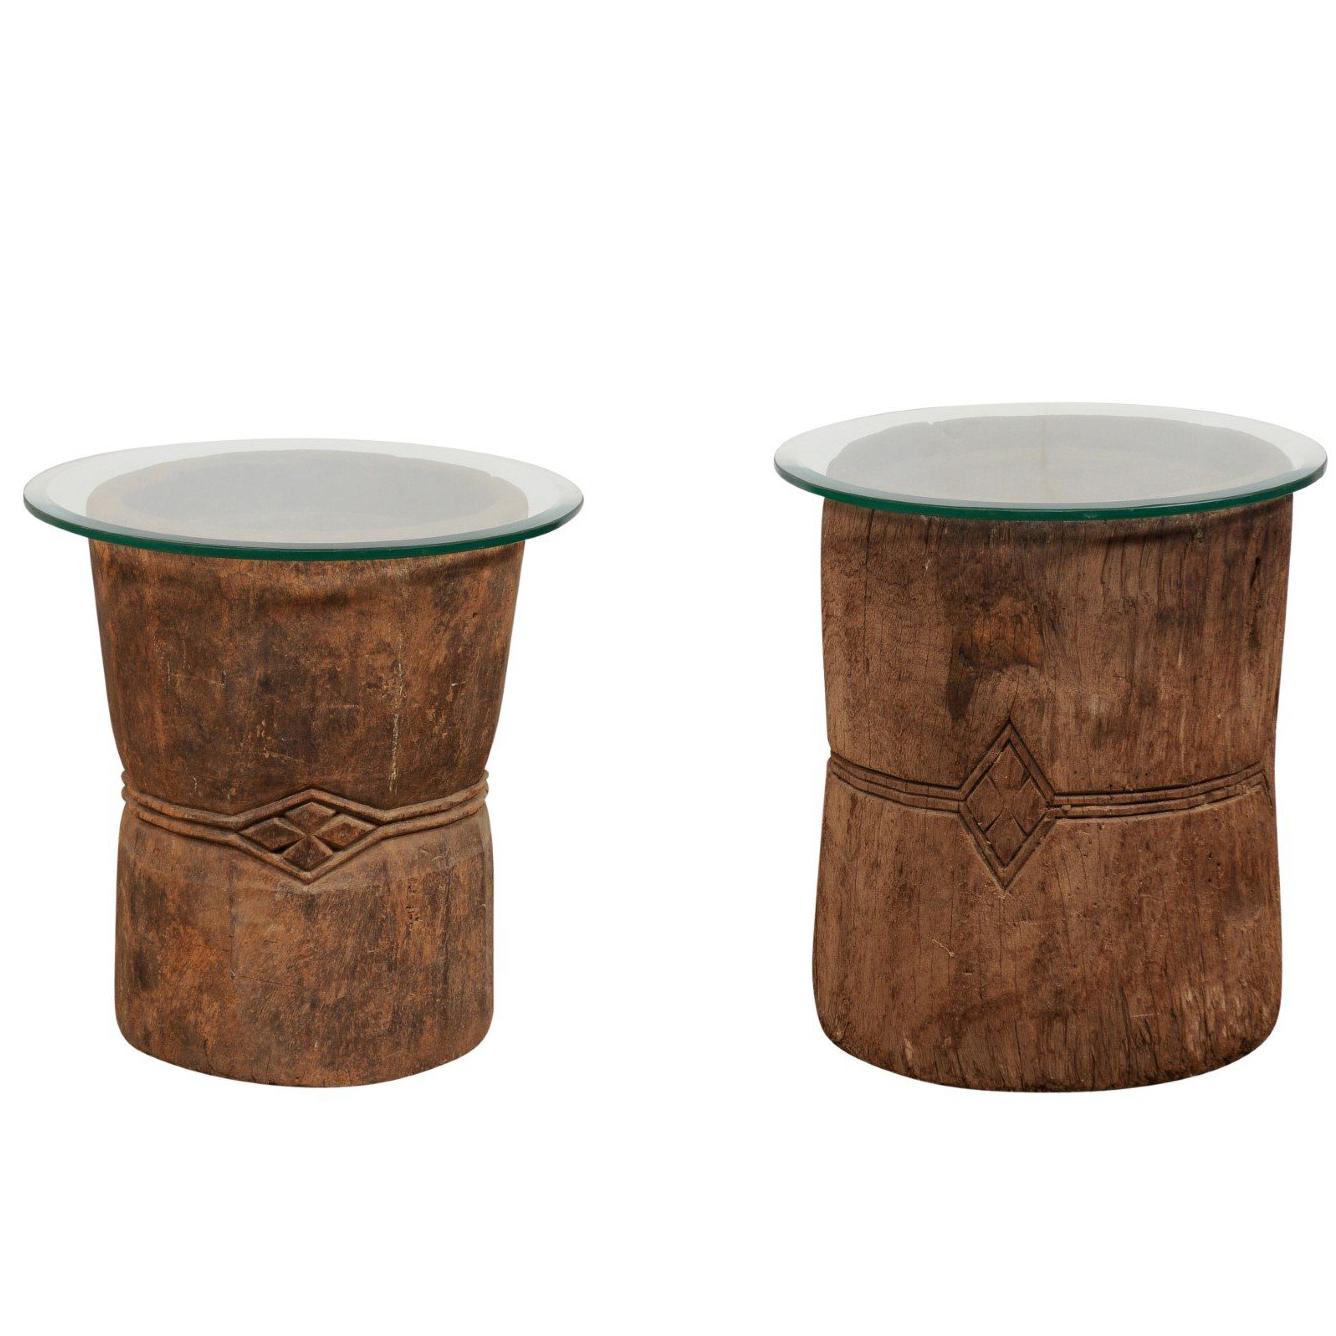 Pair of 19th Century Rustic Wood Mortar and Glass Top Side Tables